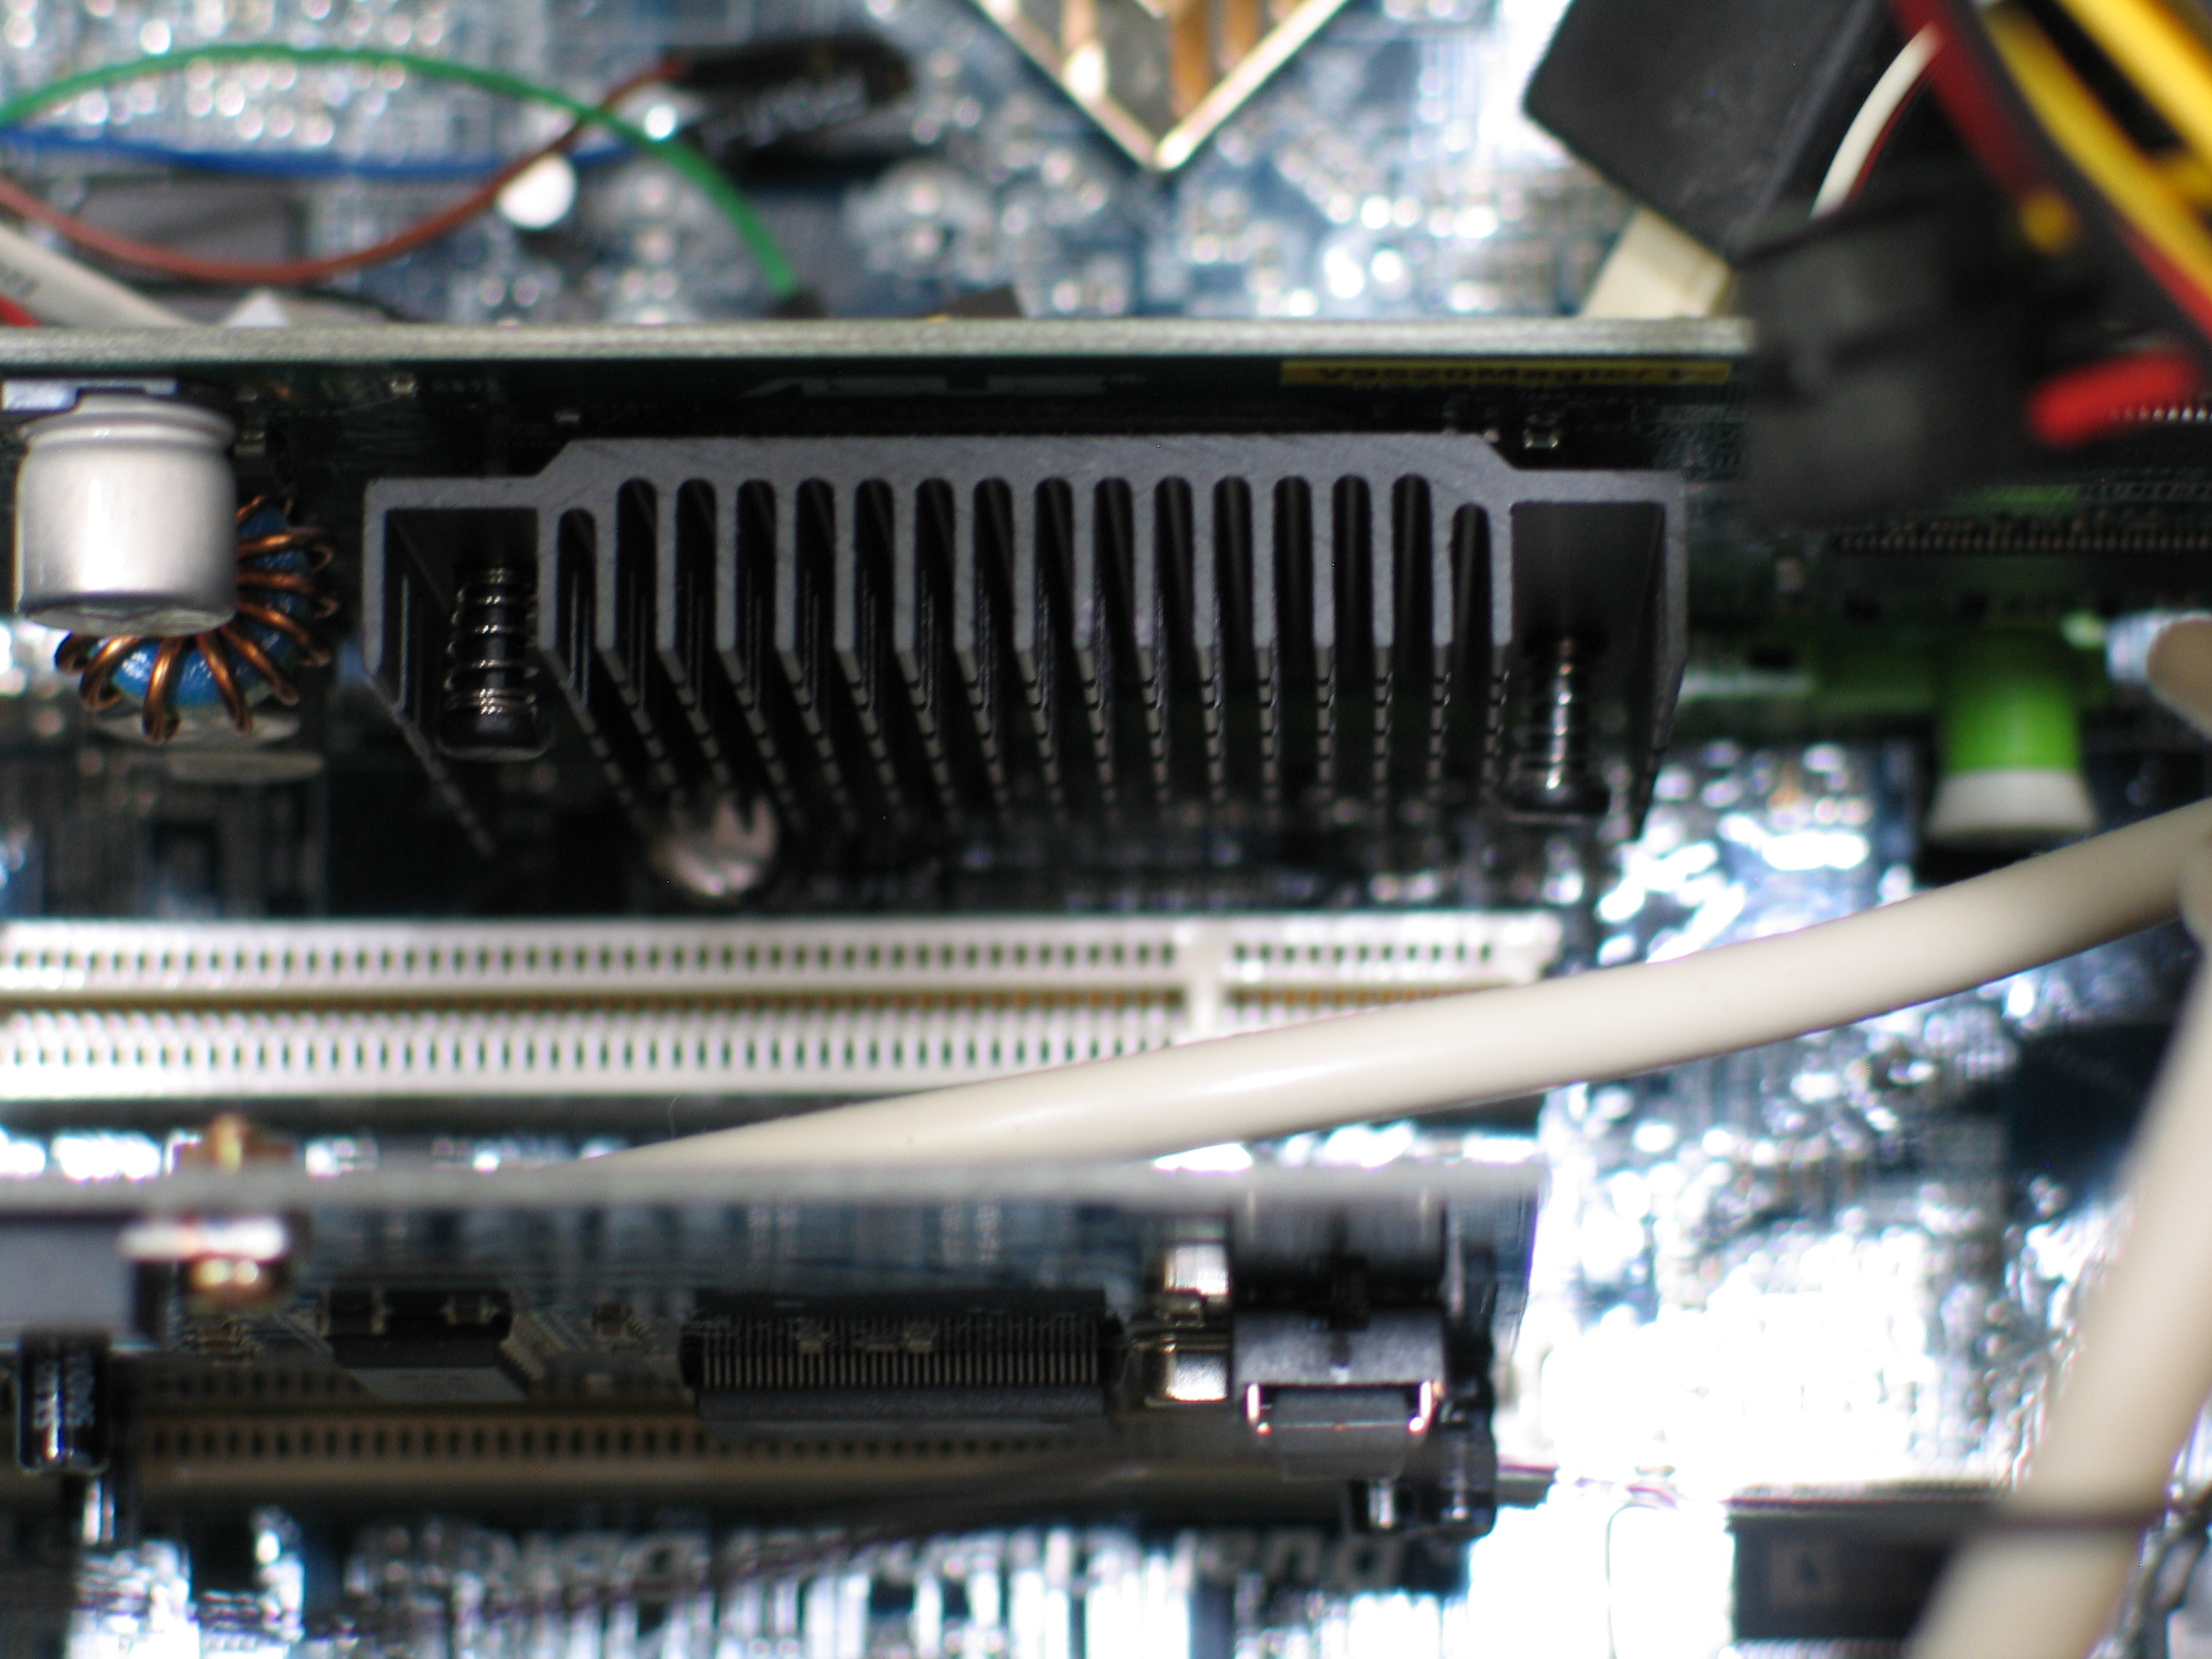 File:Silent PC-video card.JPG - Wikimedia Commons